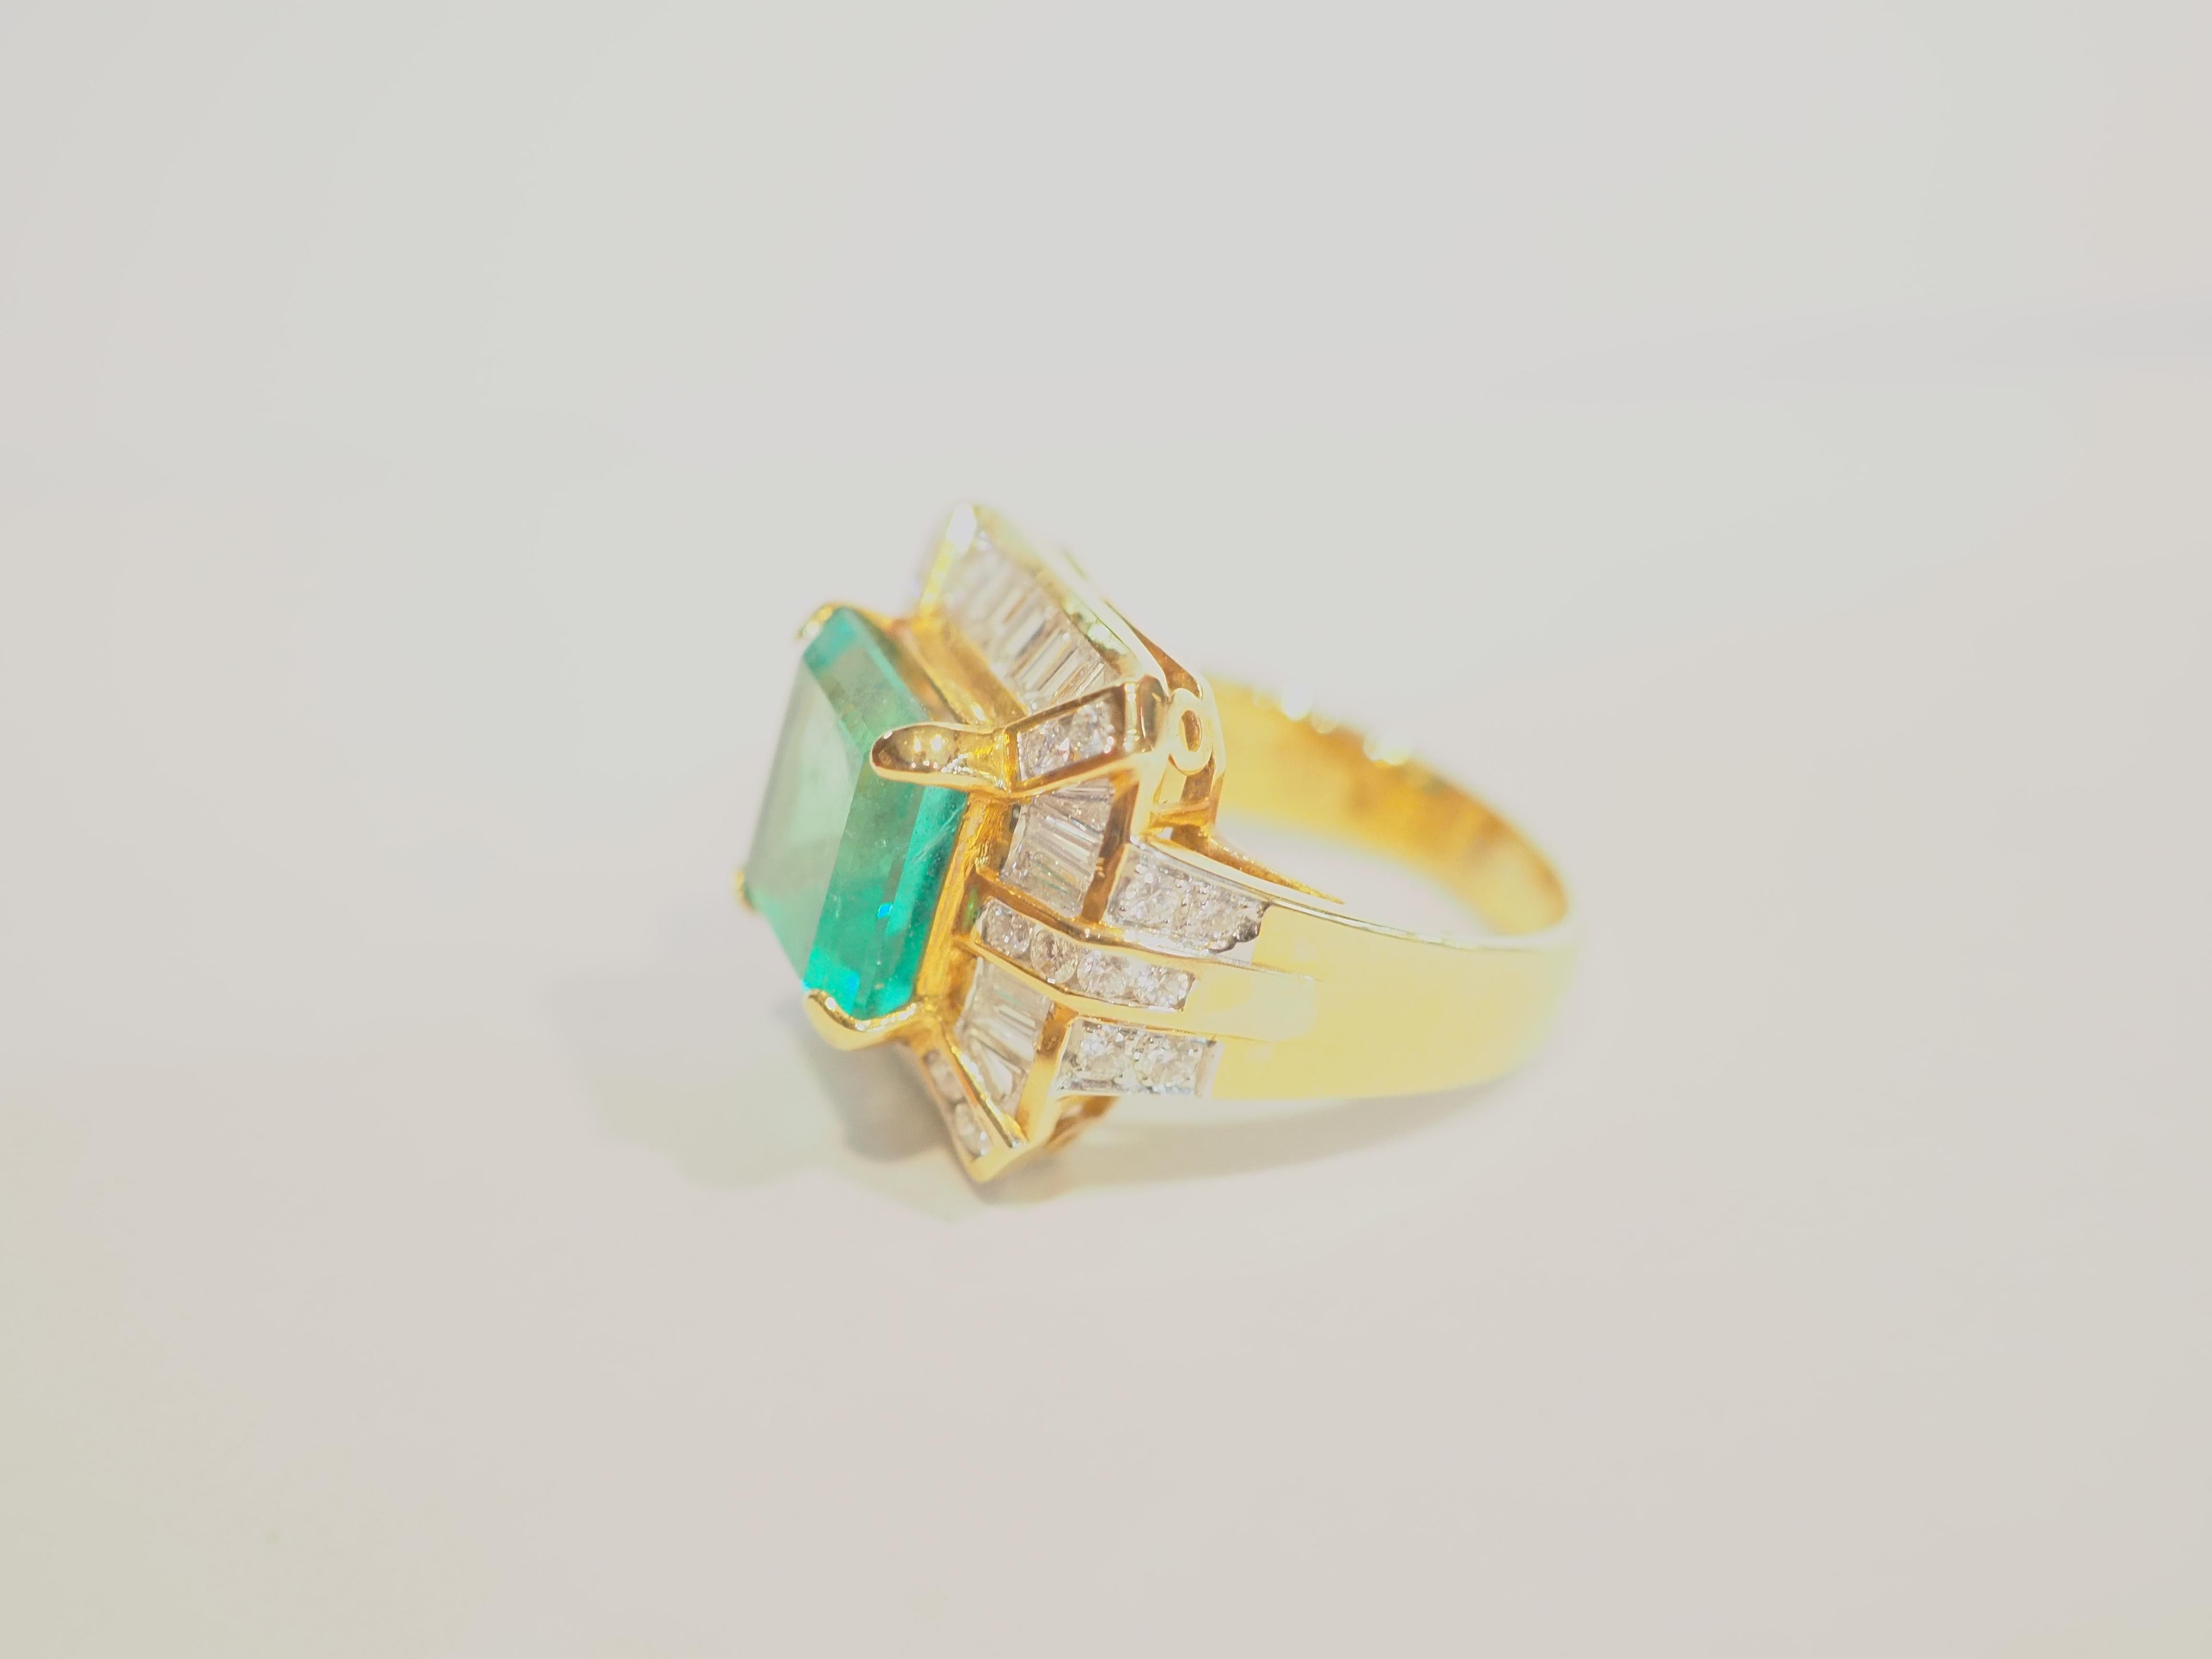  This beautiful cocktail ring boasts a spectacular and good quality emerald cut Colombian emerald! The diamonds are bright and lively and clarity and color all surrounding the beautiful leaf green gemstone. This ring is never worn and kept as like